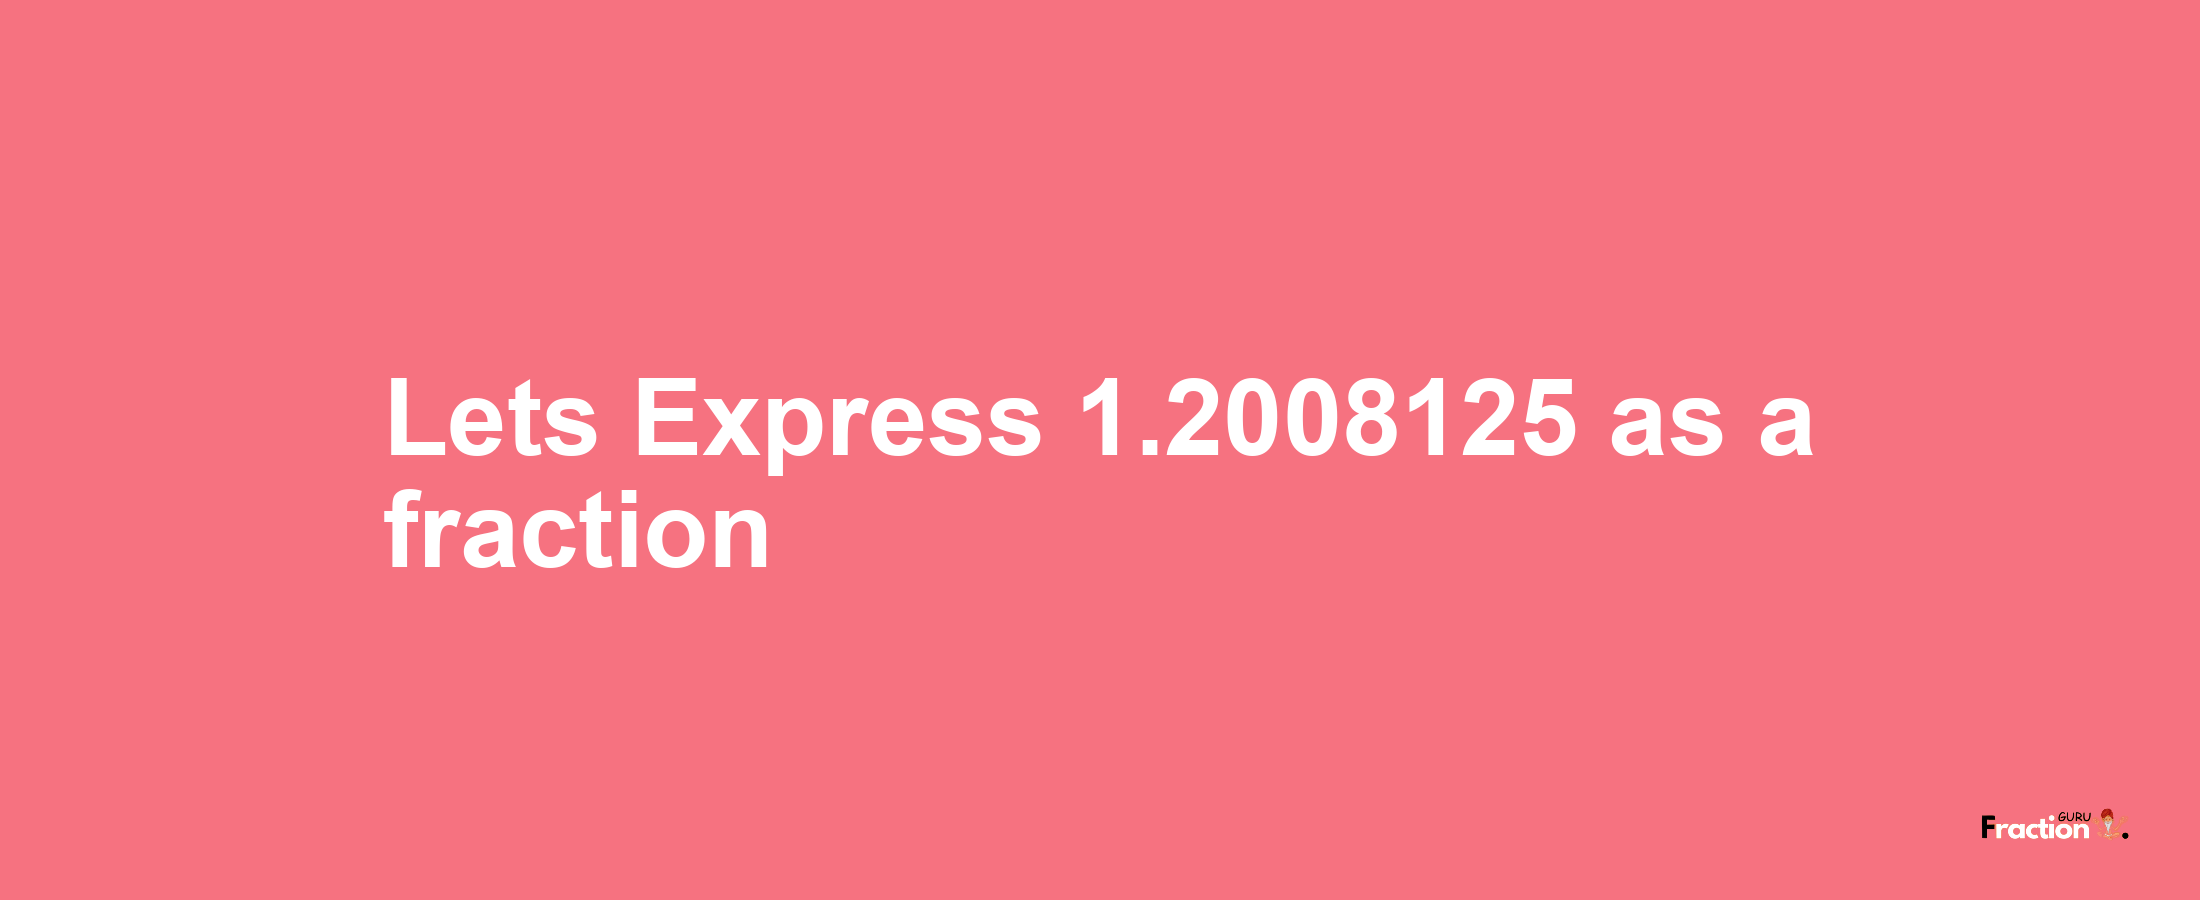 Lets Express 1.2008125 as afraction